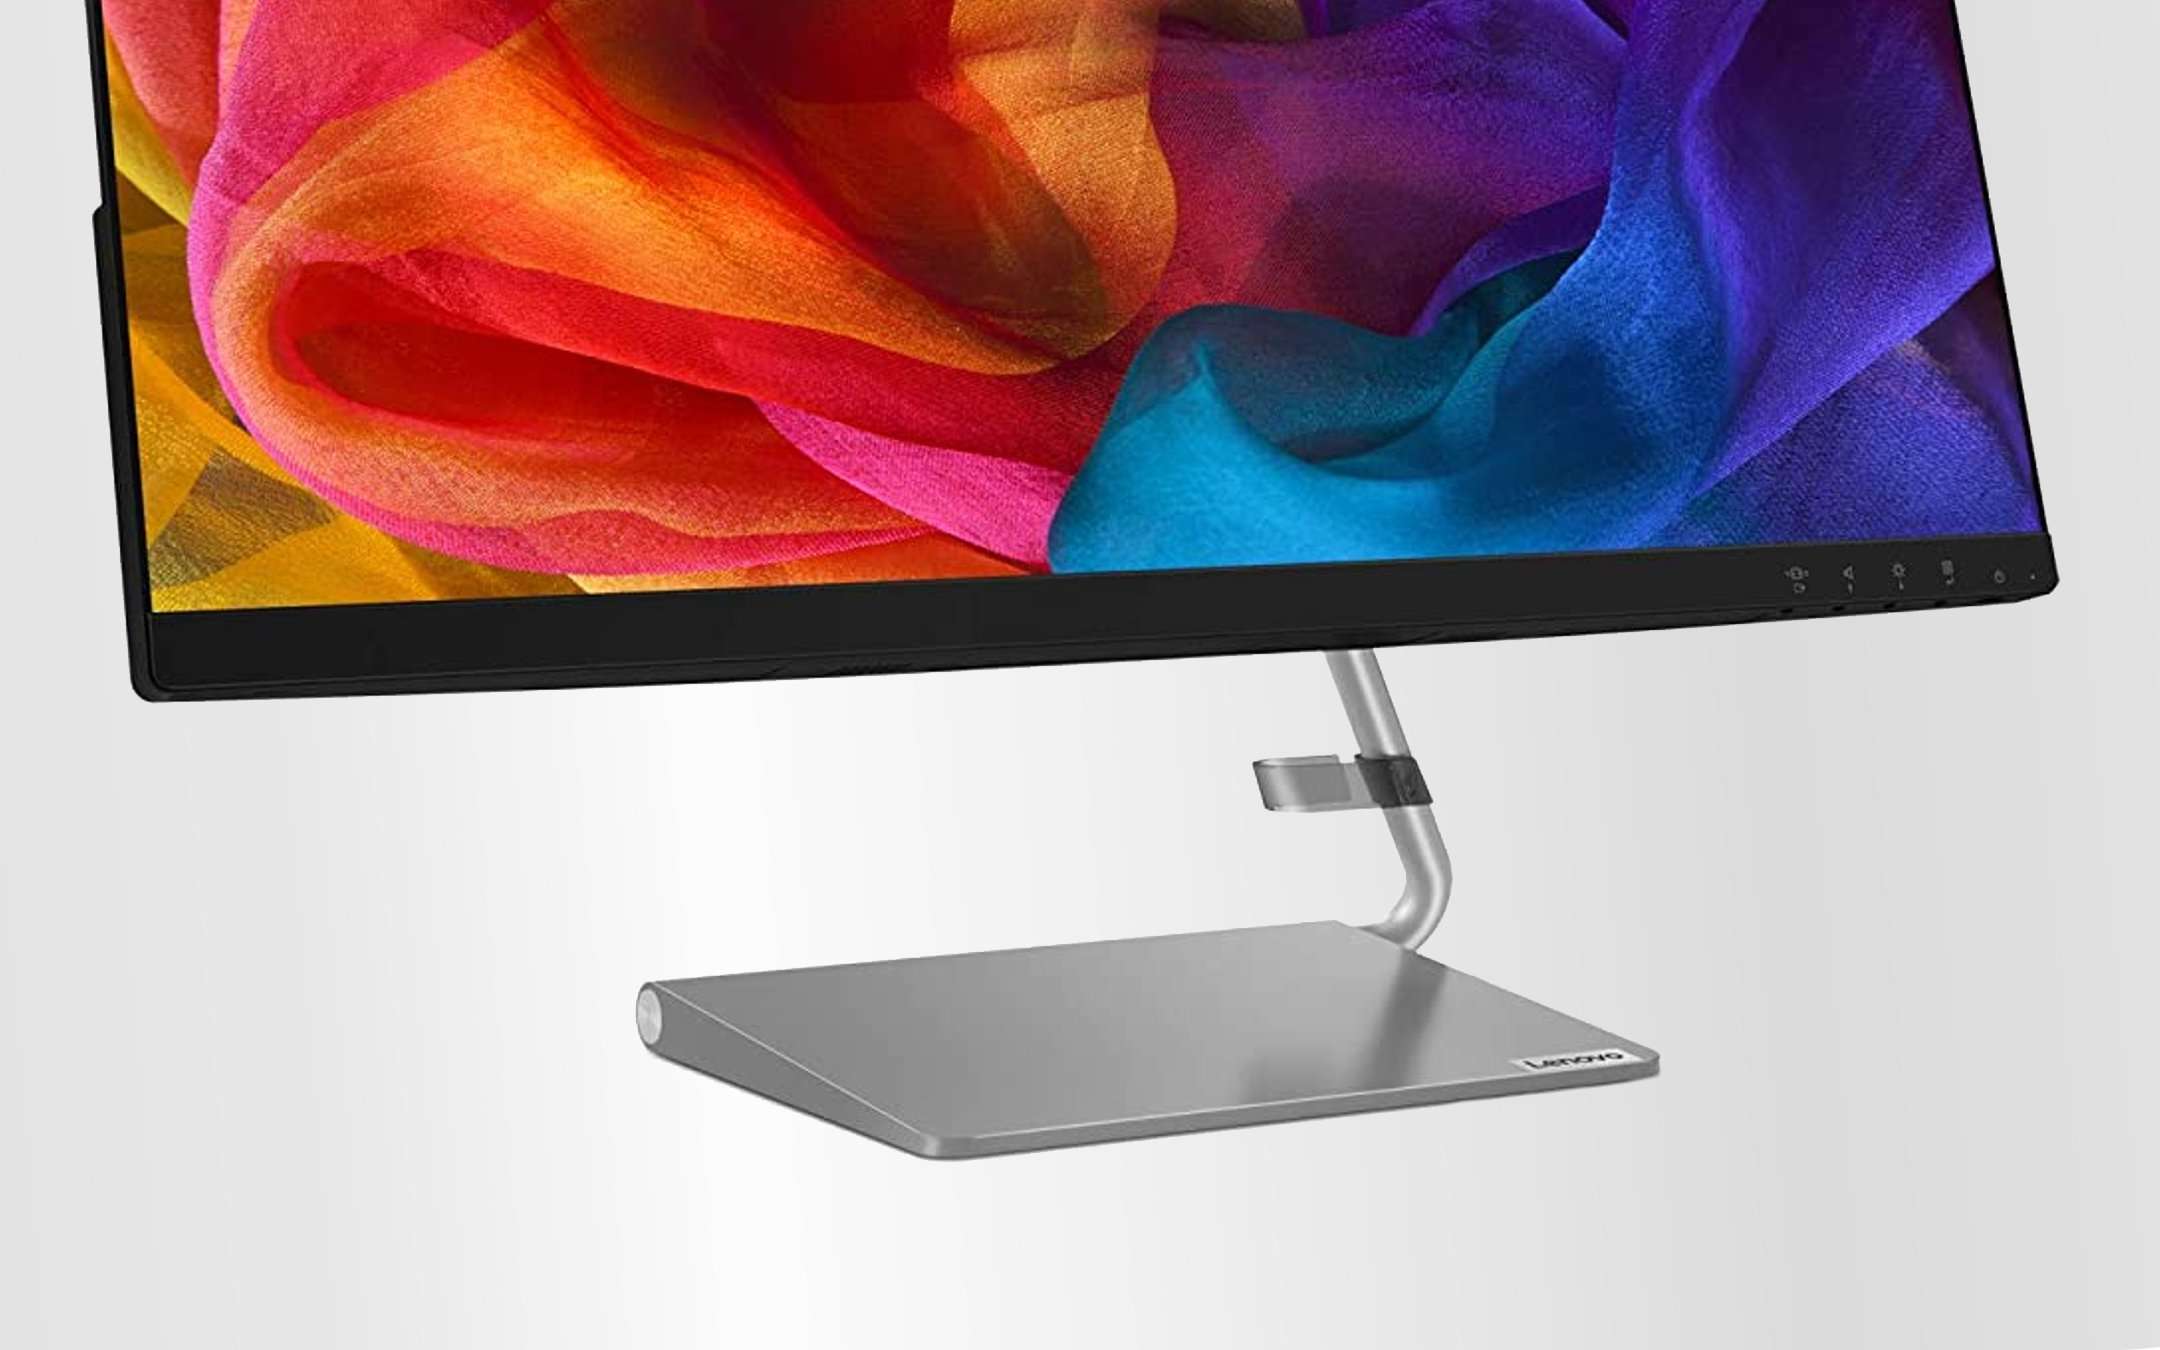 Lenovo Q27q monitor: very thin and on offer